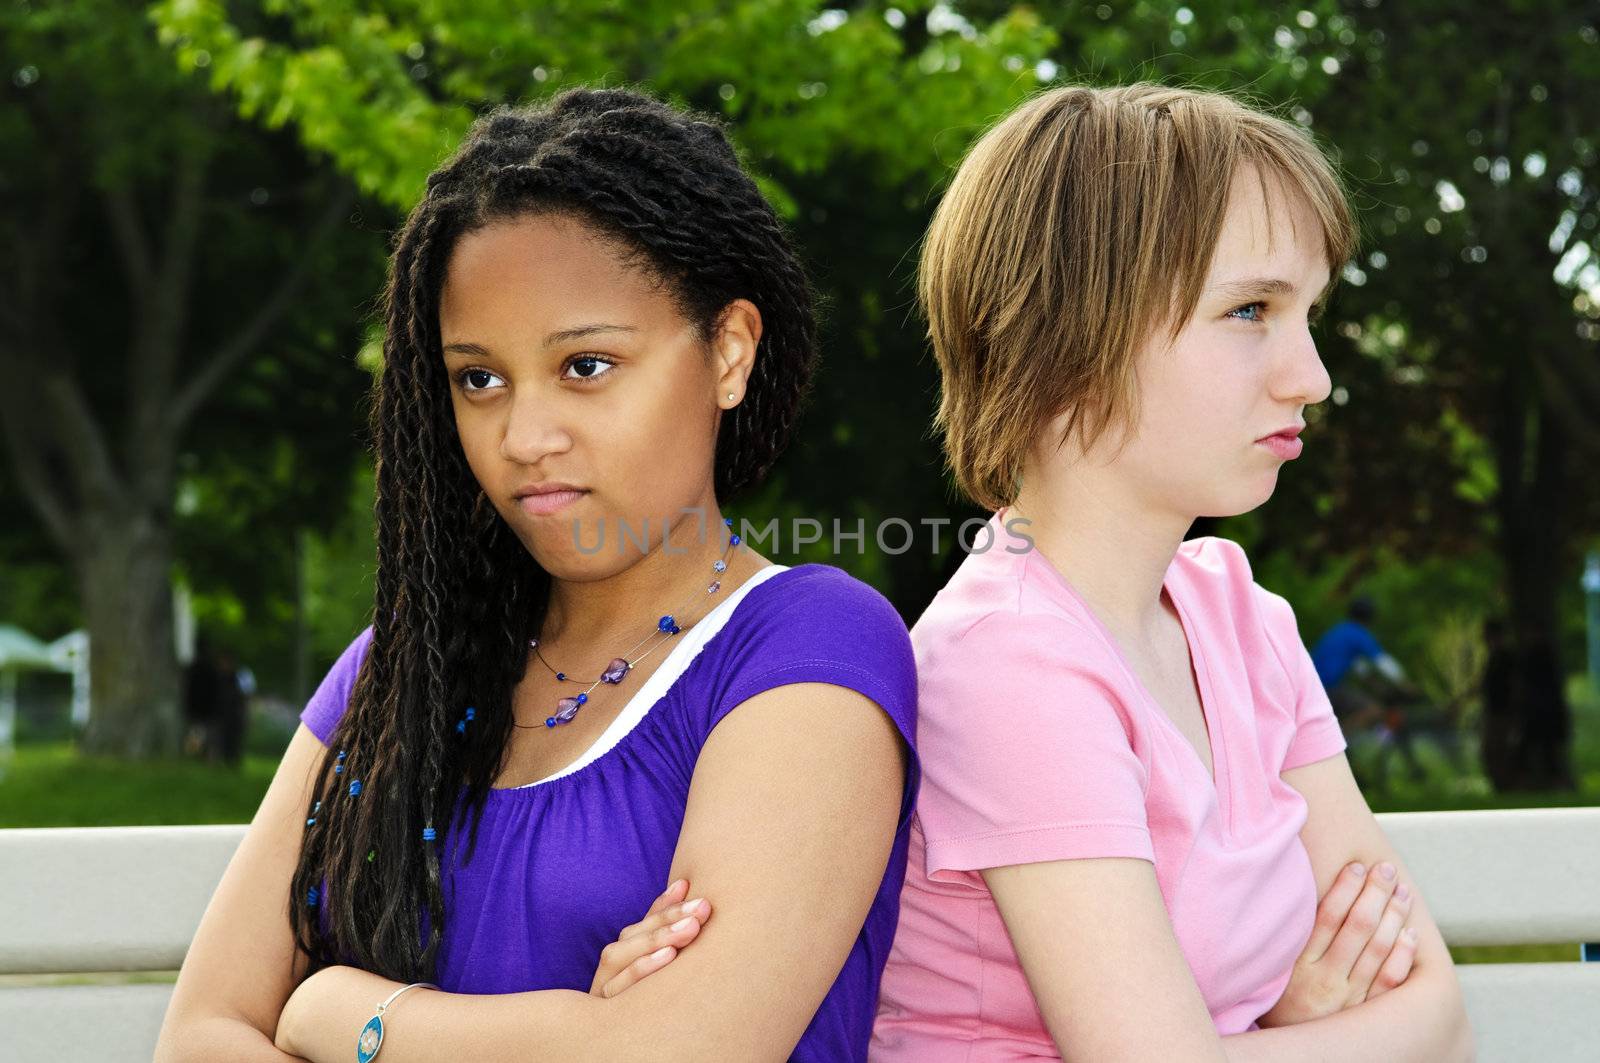 Two unhappy teenage girls sitting on bench